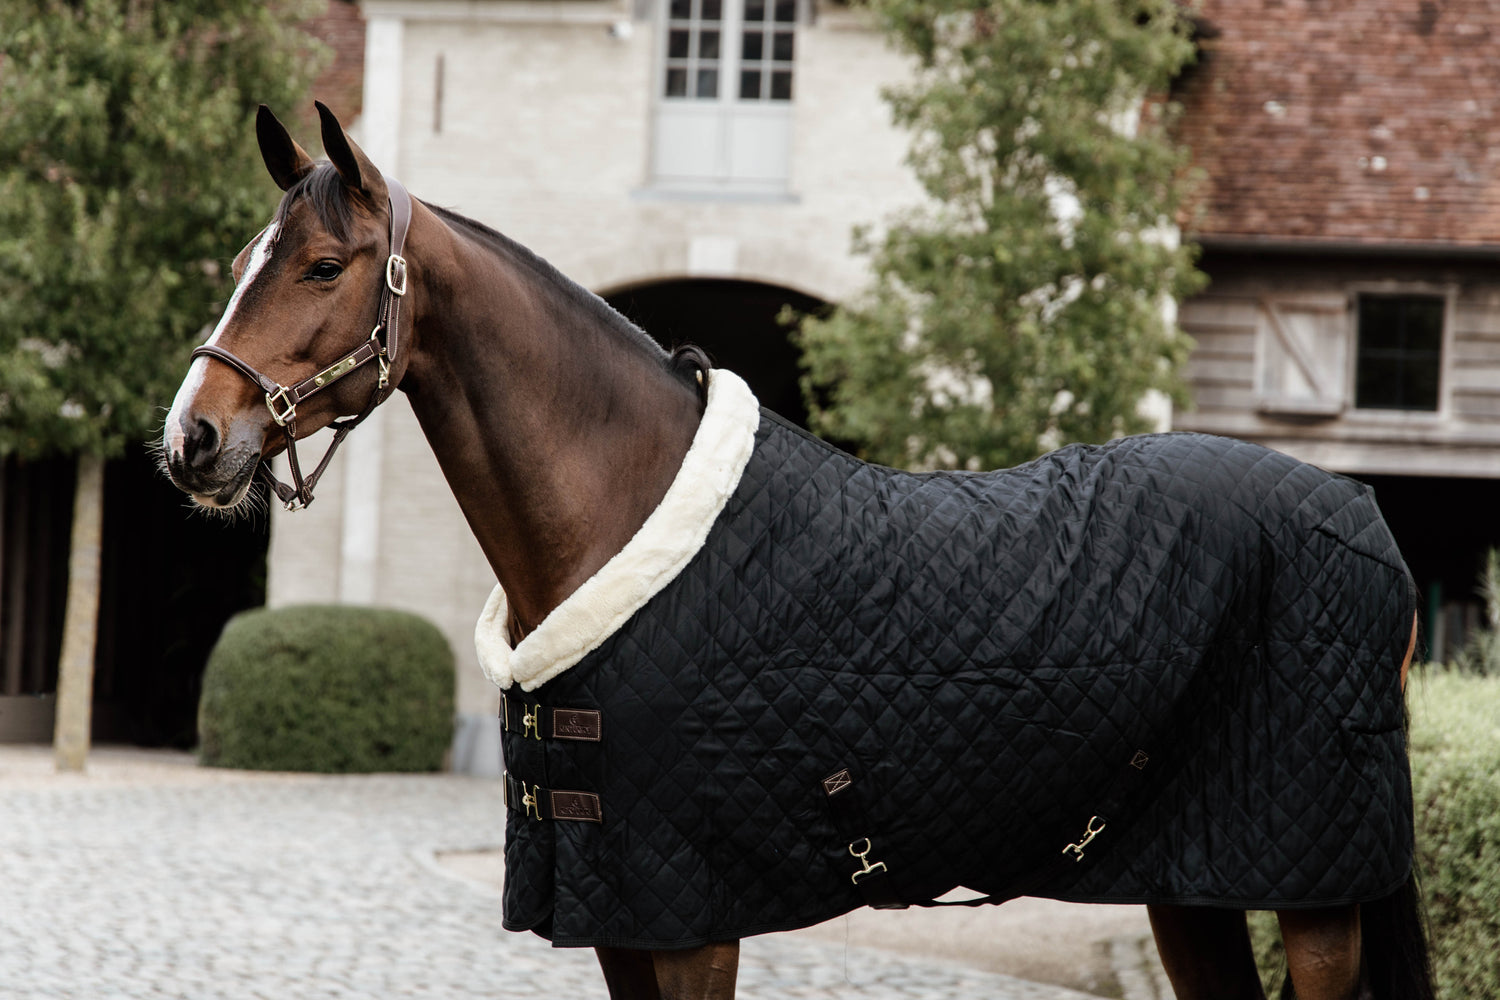 The Kentucky Horsewear Show Rug  has a contoured shape gives the perfect fit. The Faux fur creates tiny air pockets and as a result traps air, retaining the horses body heat.   The luxurious soft artificial fur lining prevents rubbing whilst providing ultimate comfort and warmth for your horse.